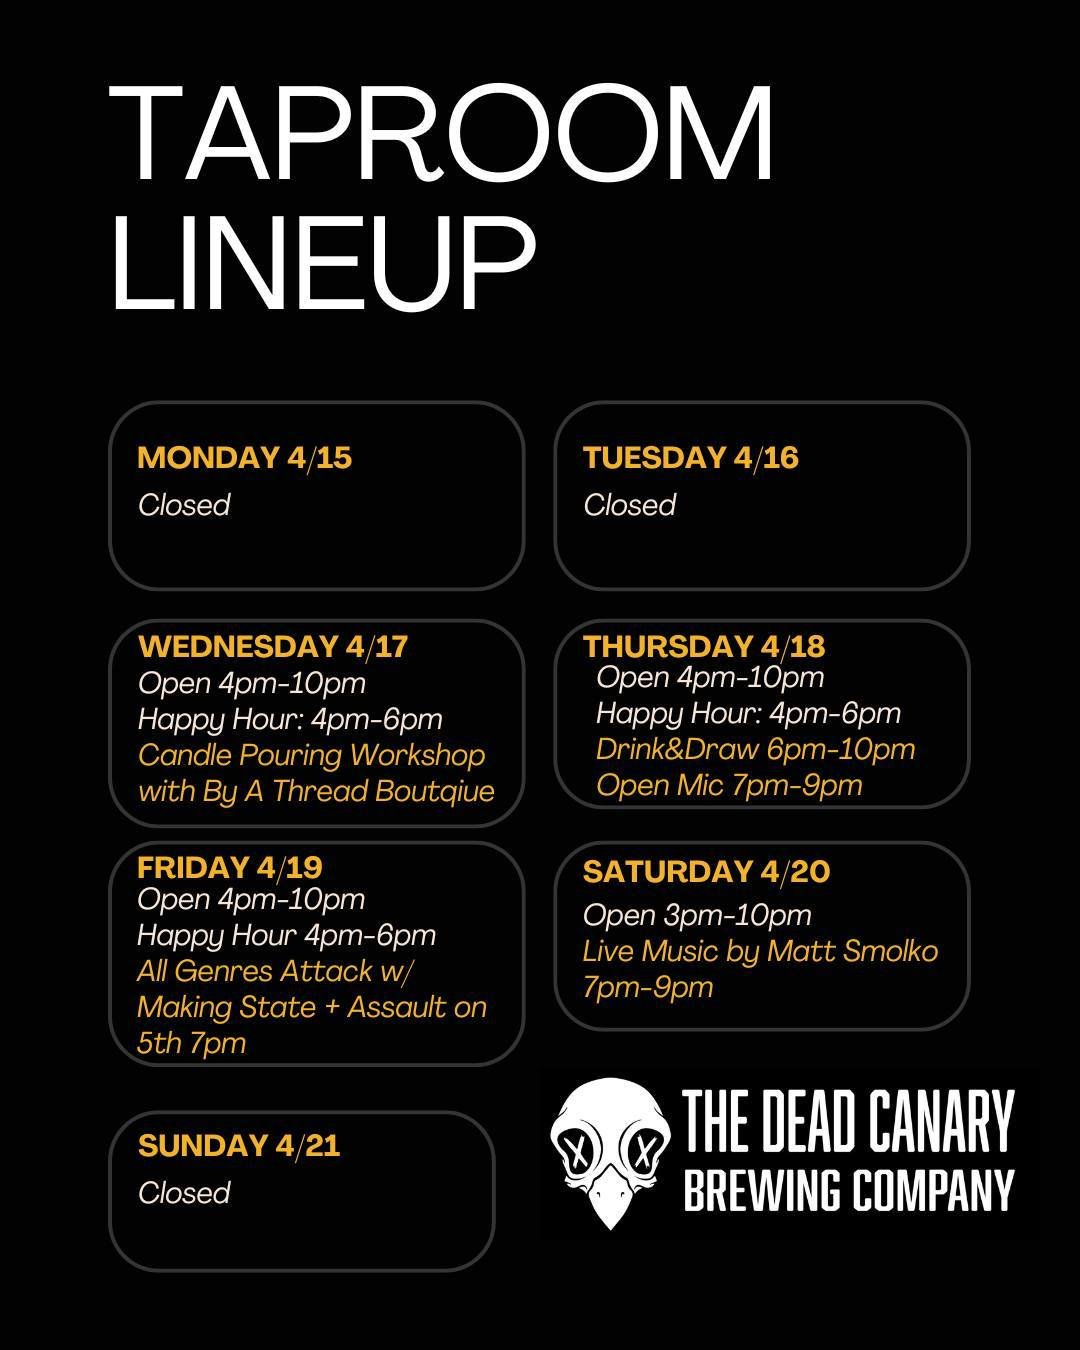 The weekly lineup has arrived and BOY it is a stacked week! 

Wednesday: By A Thread joins us in the taproom at 6:30pm for a BEER THEMED candle pouring workshop! Purchase your tickets through their website: https://byathreadboutique.com/products/dead